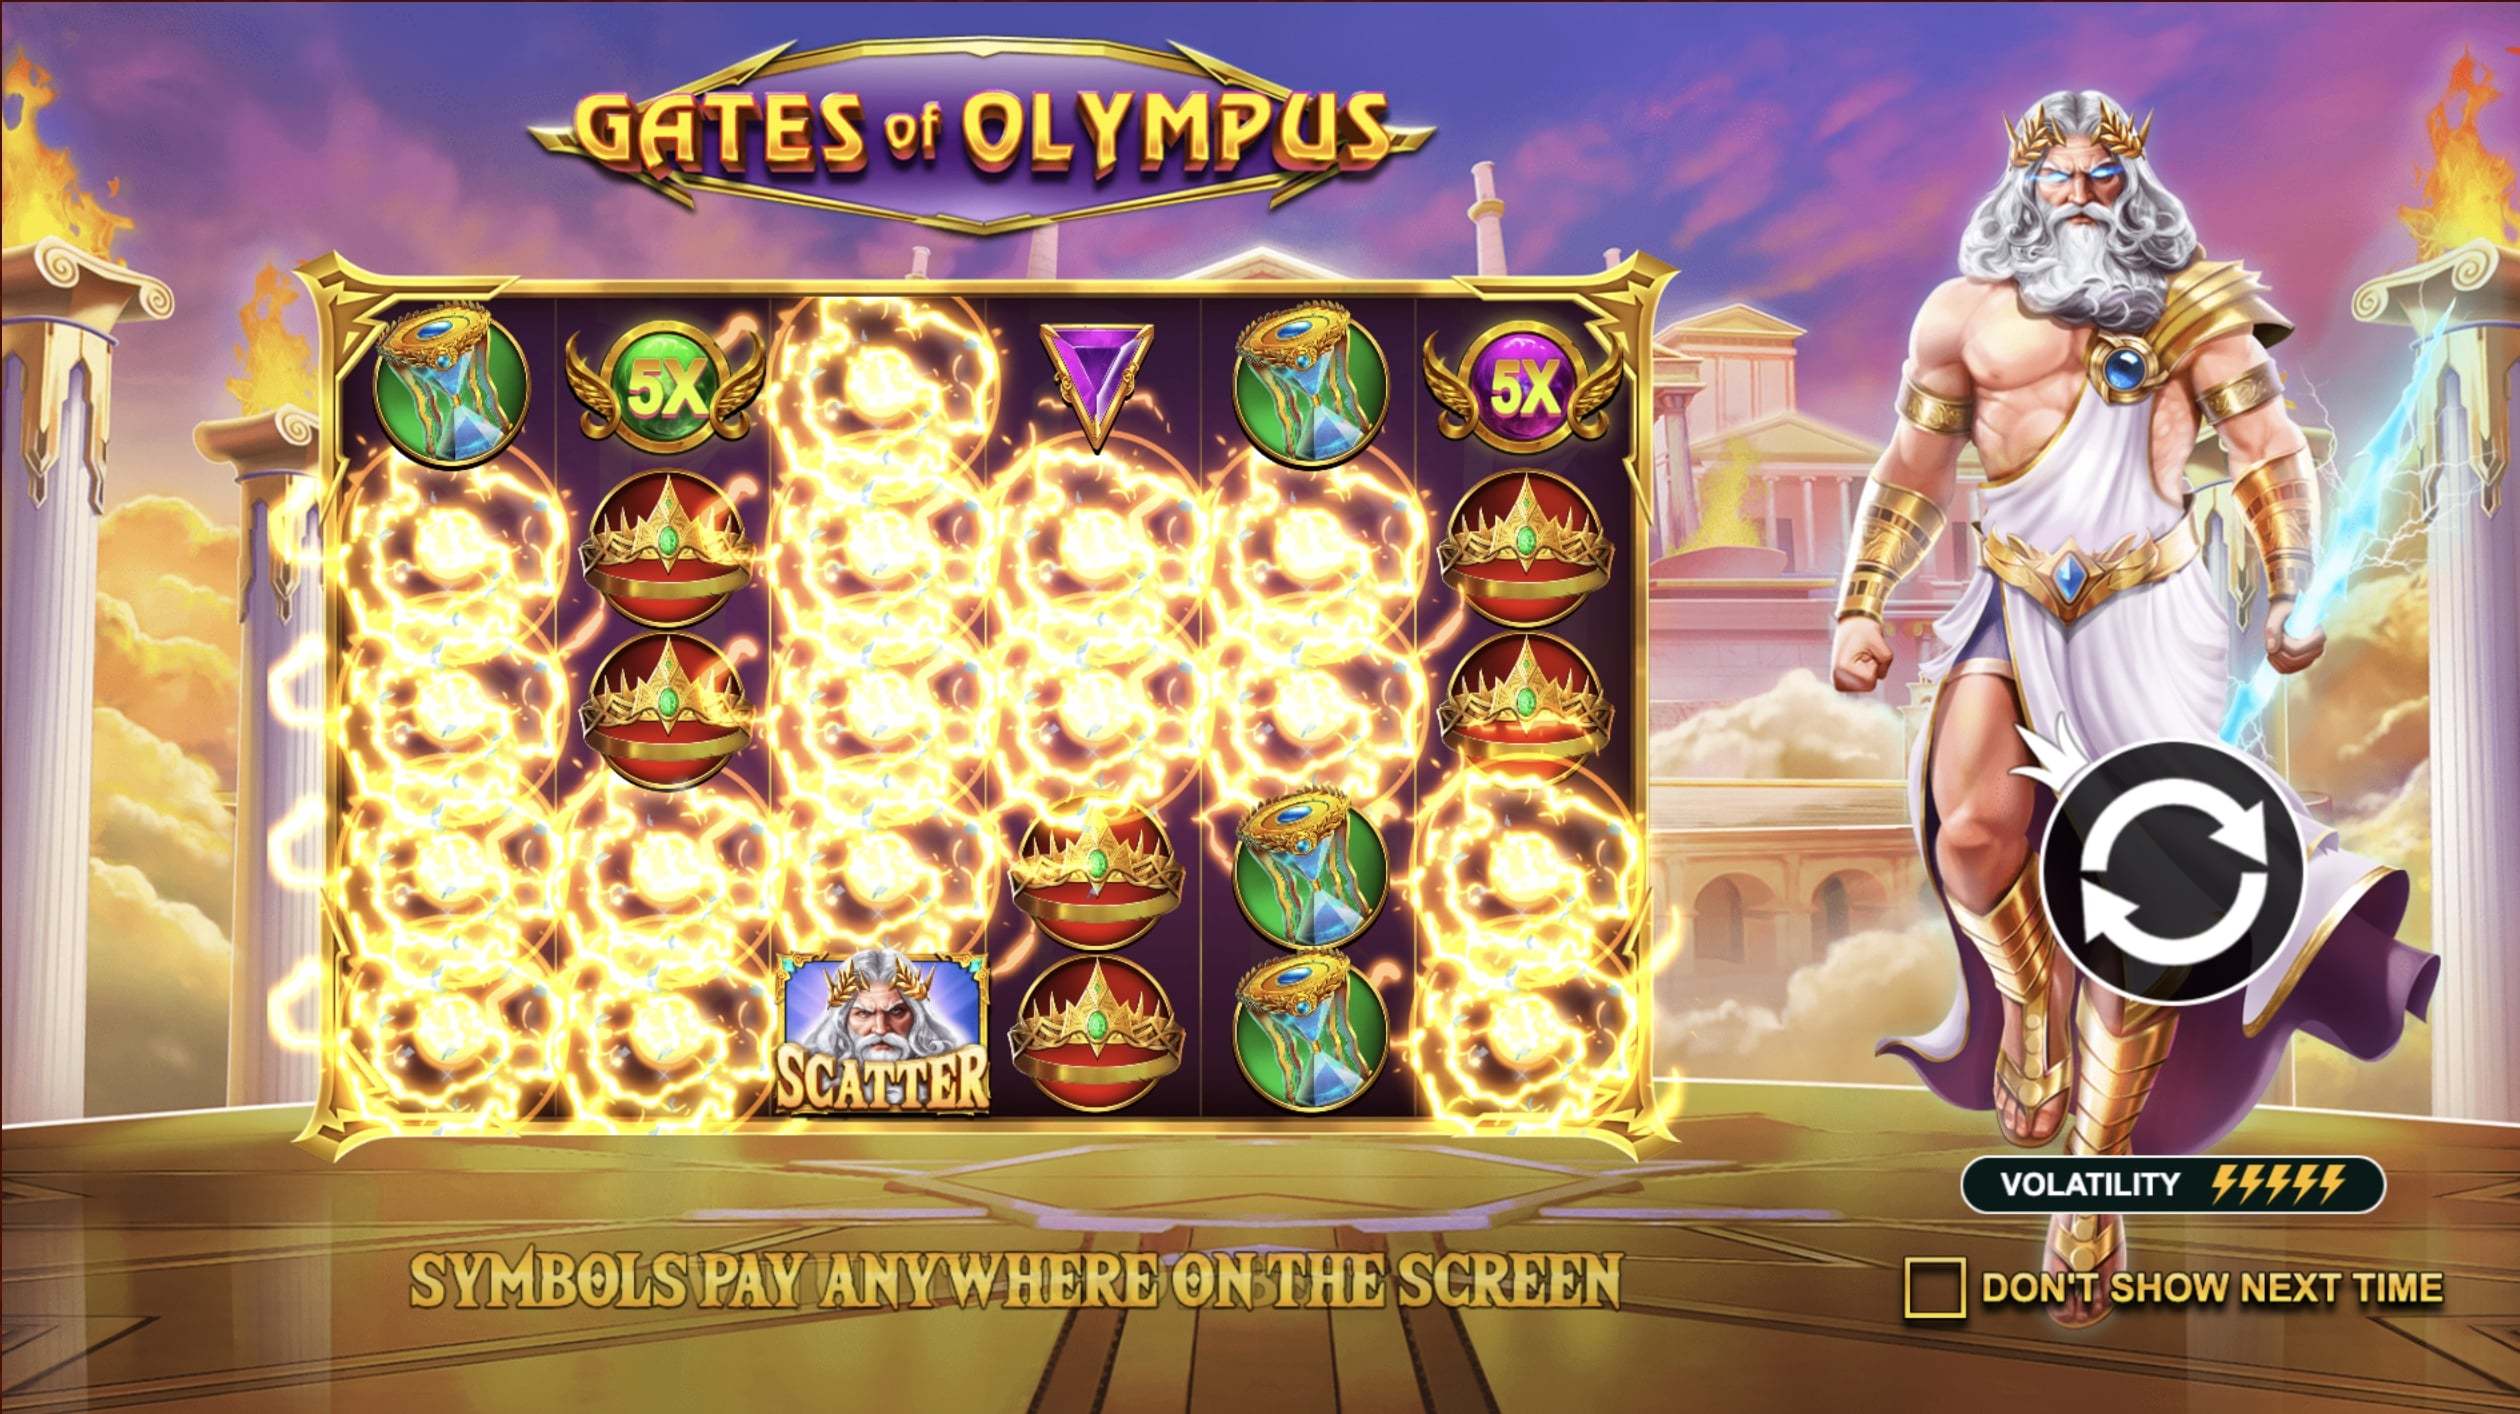 Gates of Olympus Slot features